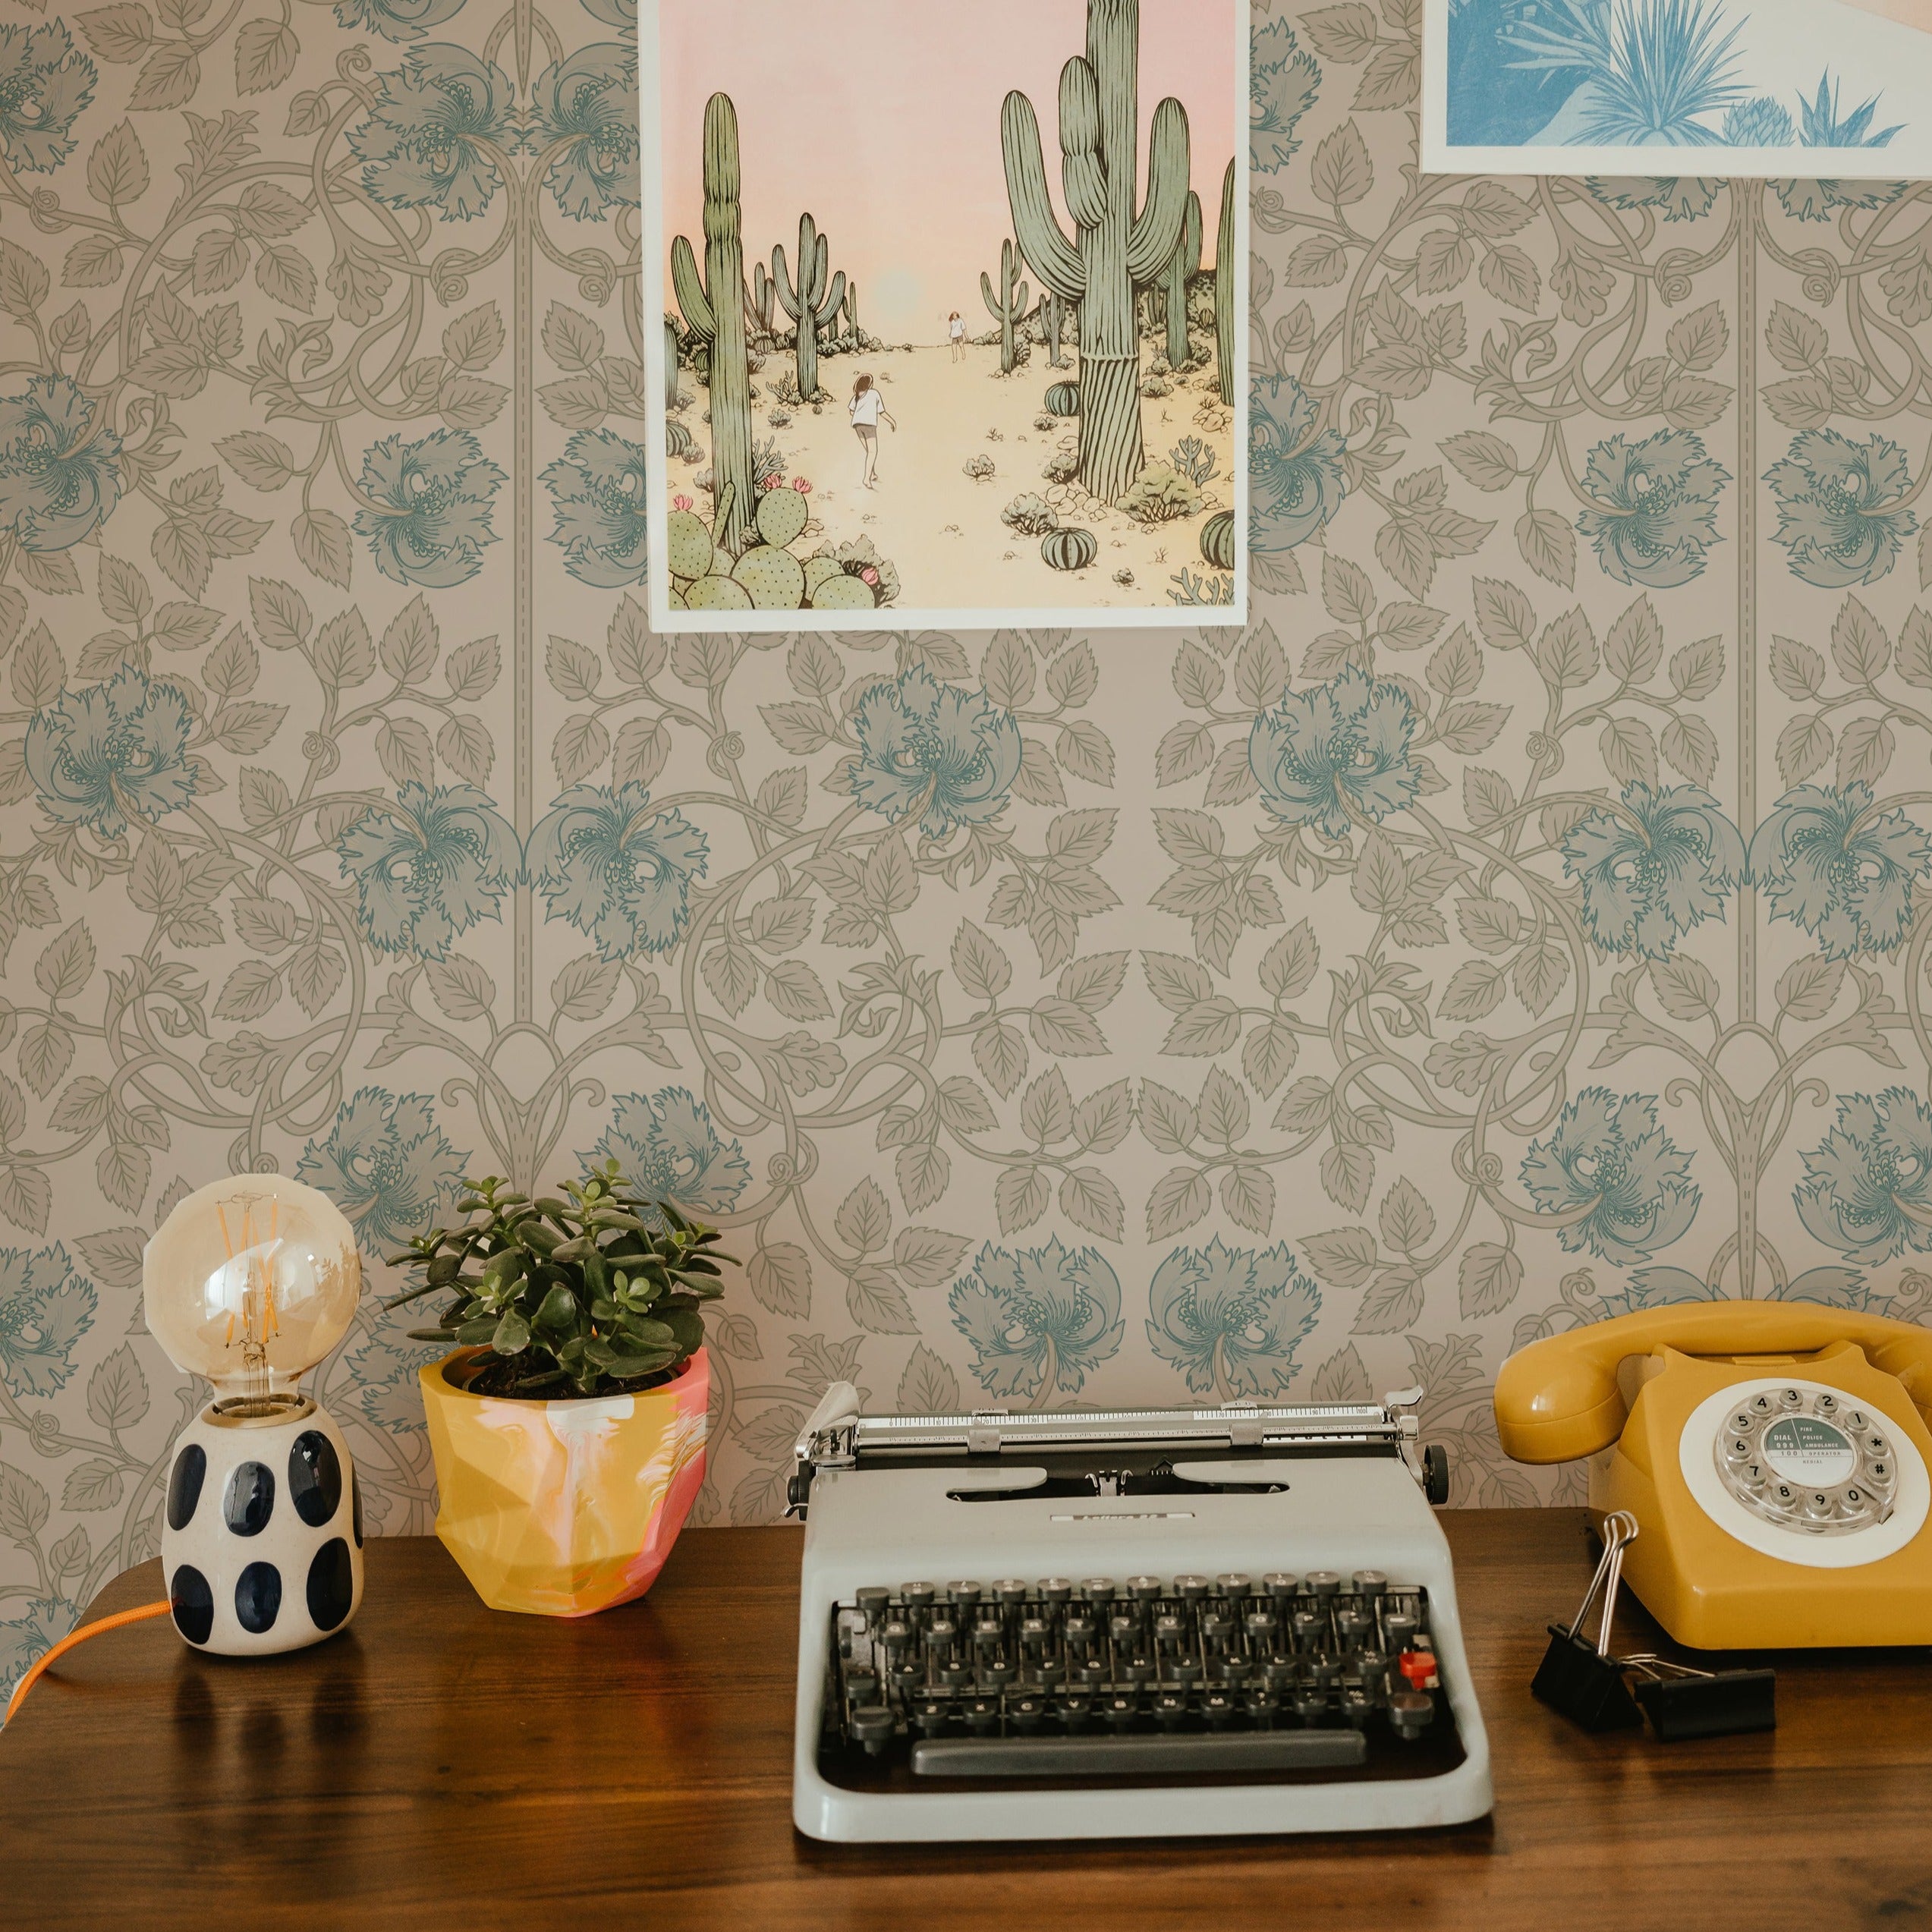 A vintage-inspired workspace with a retro typewriter, a rotary dial phone, and a modern table lamp on a desk. The background is adorned with a Color Burn Damask Wallpaper in teal and beige floral patterns